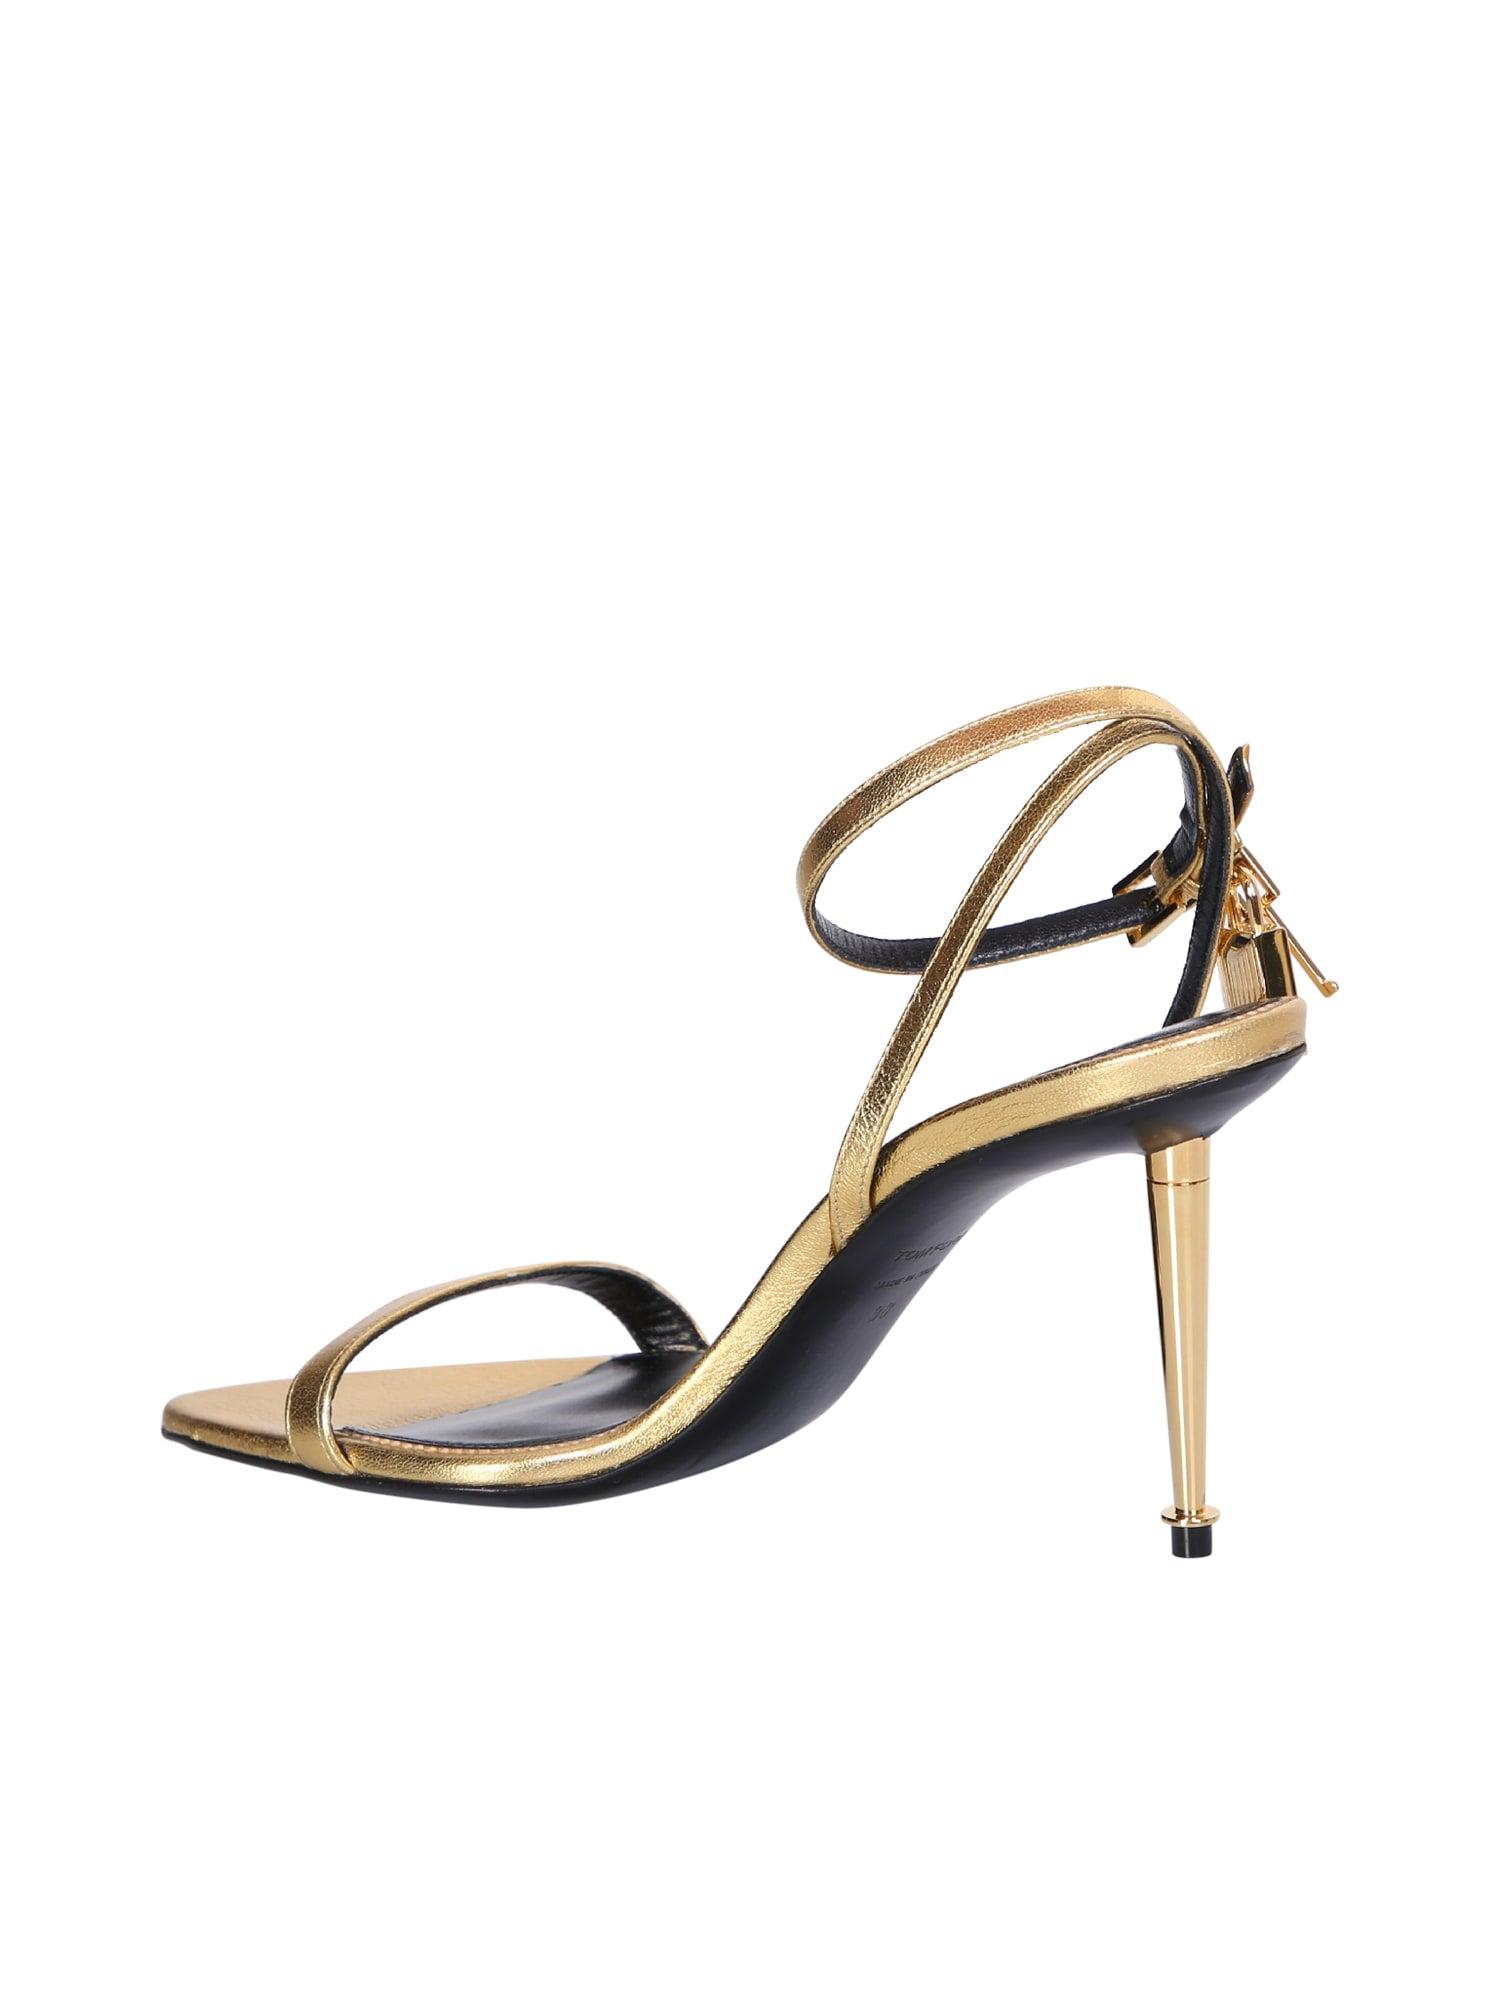 Arriba 102+ imagen tom ford strappy sandals - Abzlocal.mx